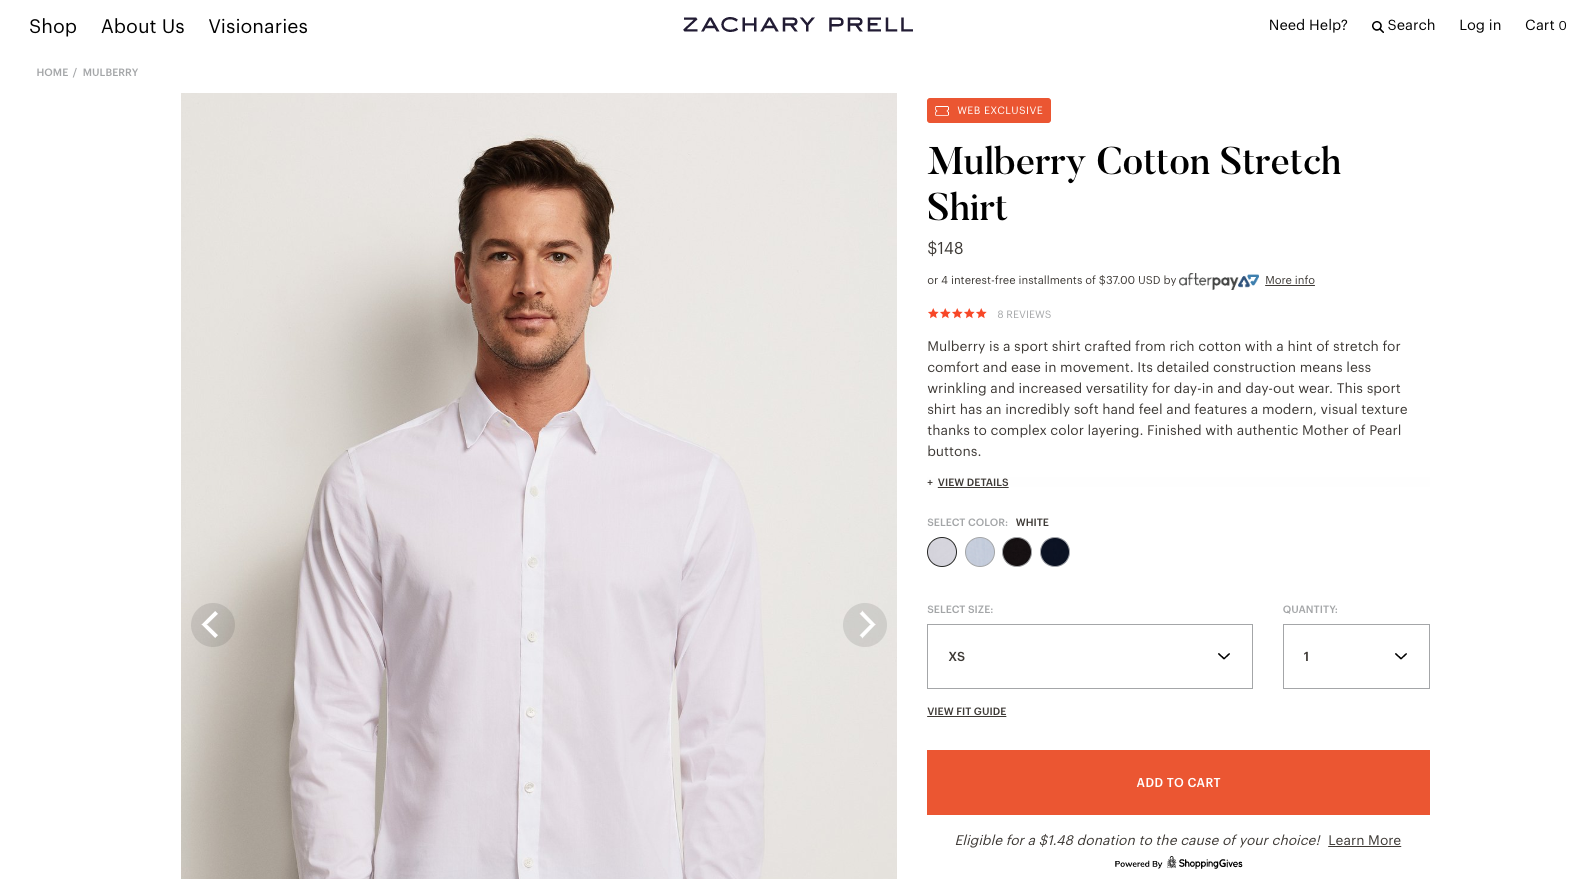 The orange CTA on Zachary Prell's product page stands out and makes it obvious where to click